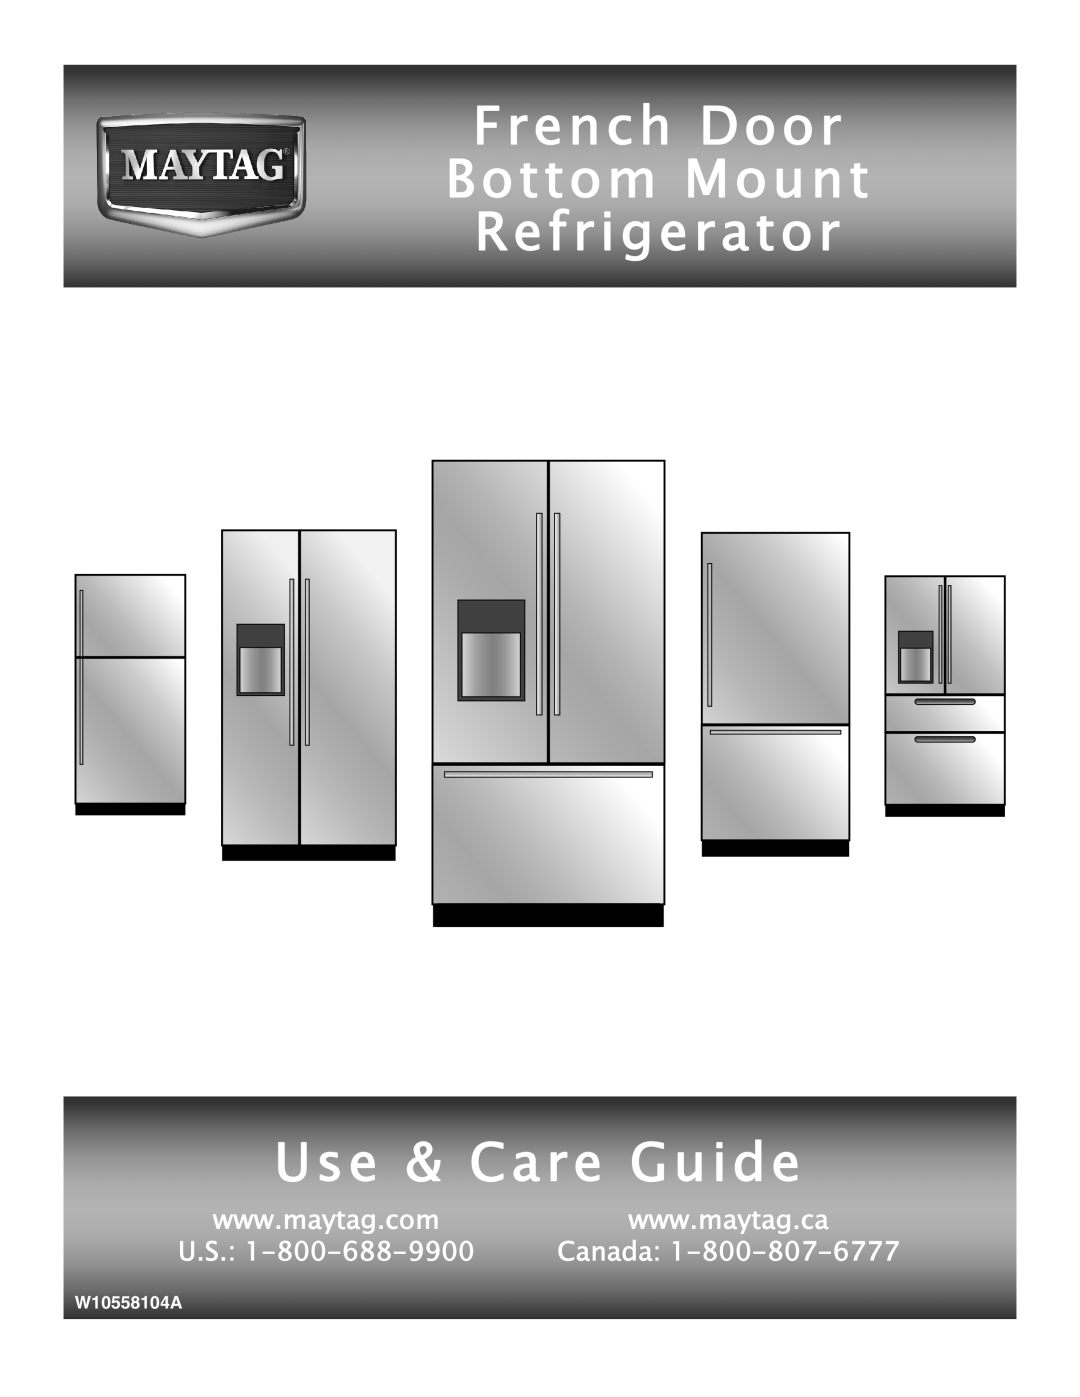 Maytag W10558104A manual French Door Bottom Mount Refrigerator Use & Care Guide, Canada 